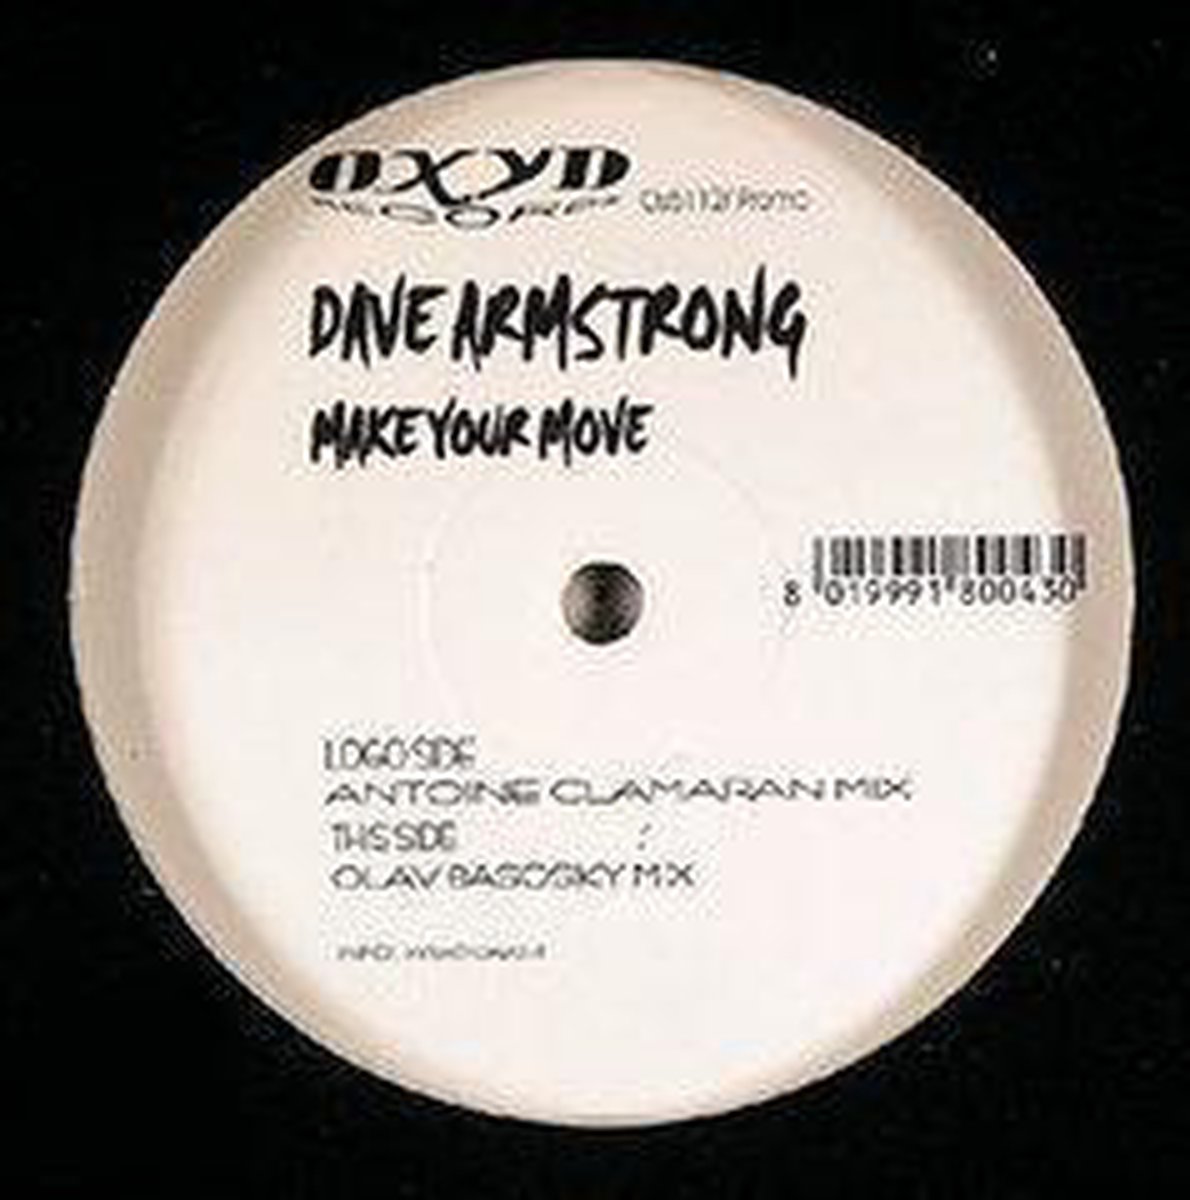 Make Your Move - Dave Armstrong